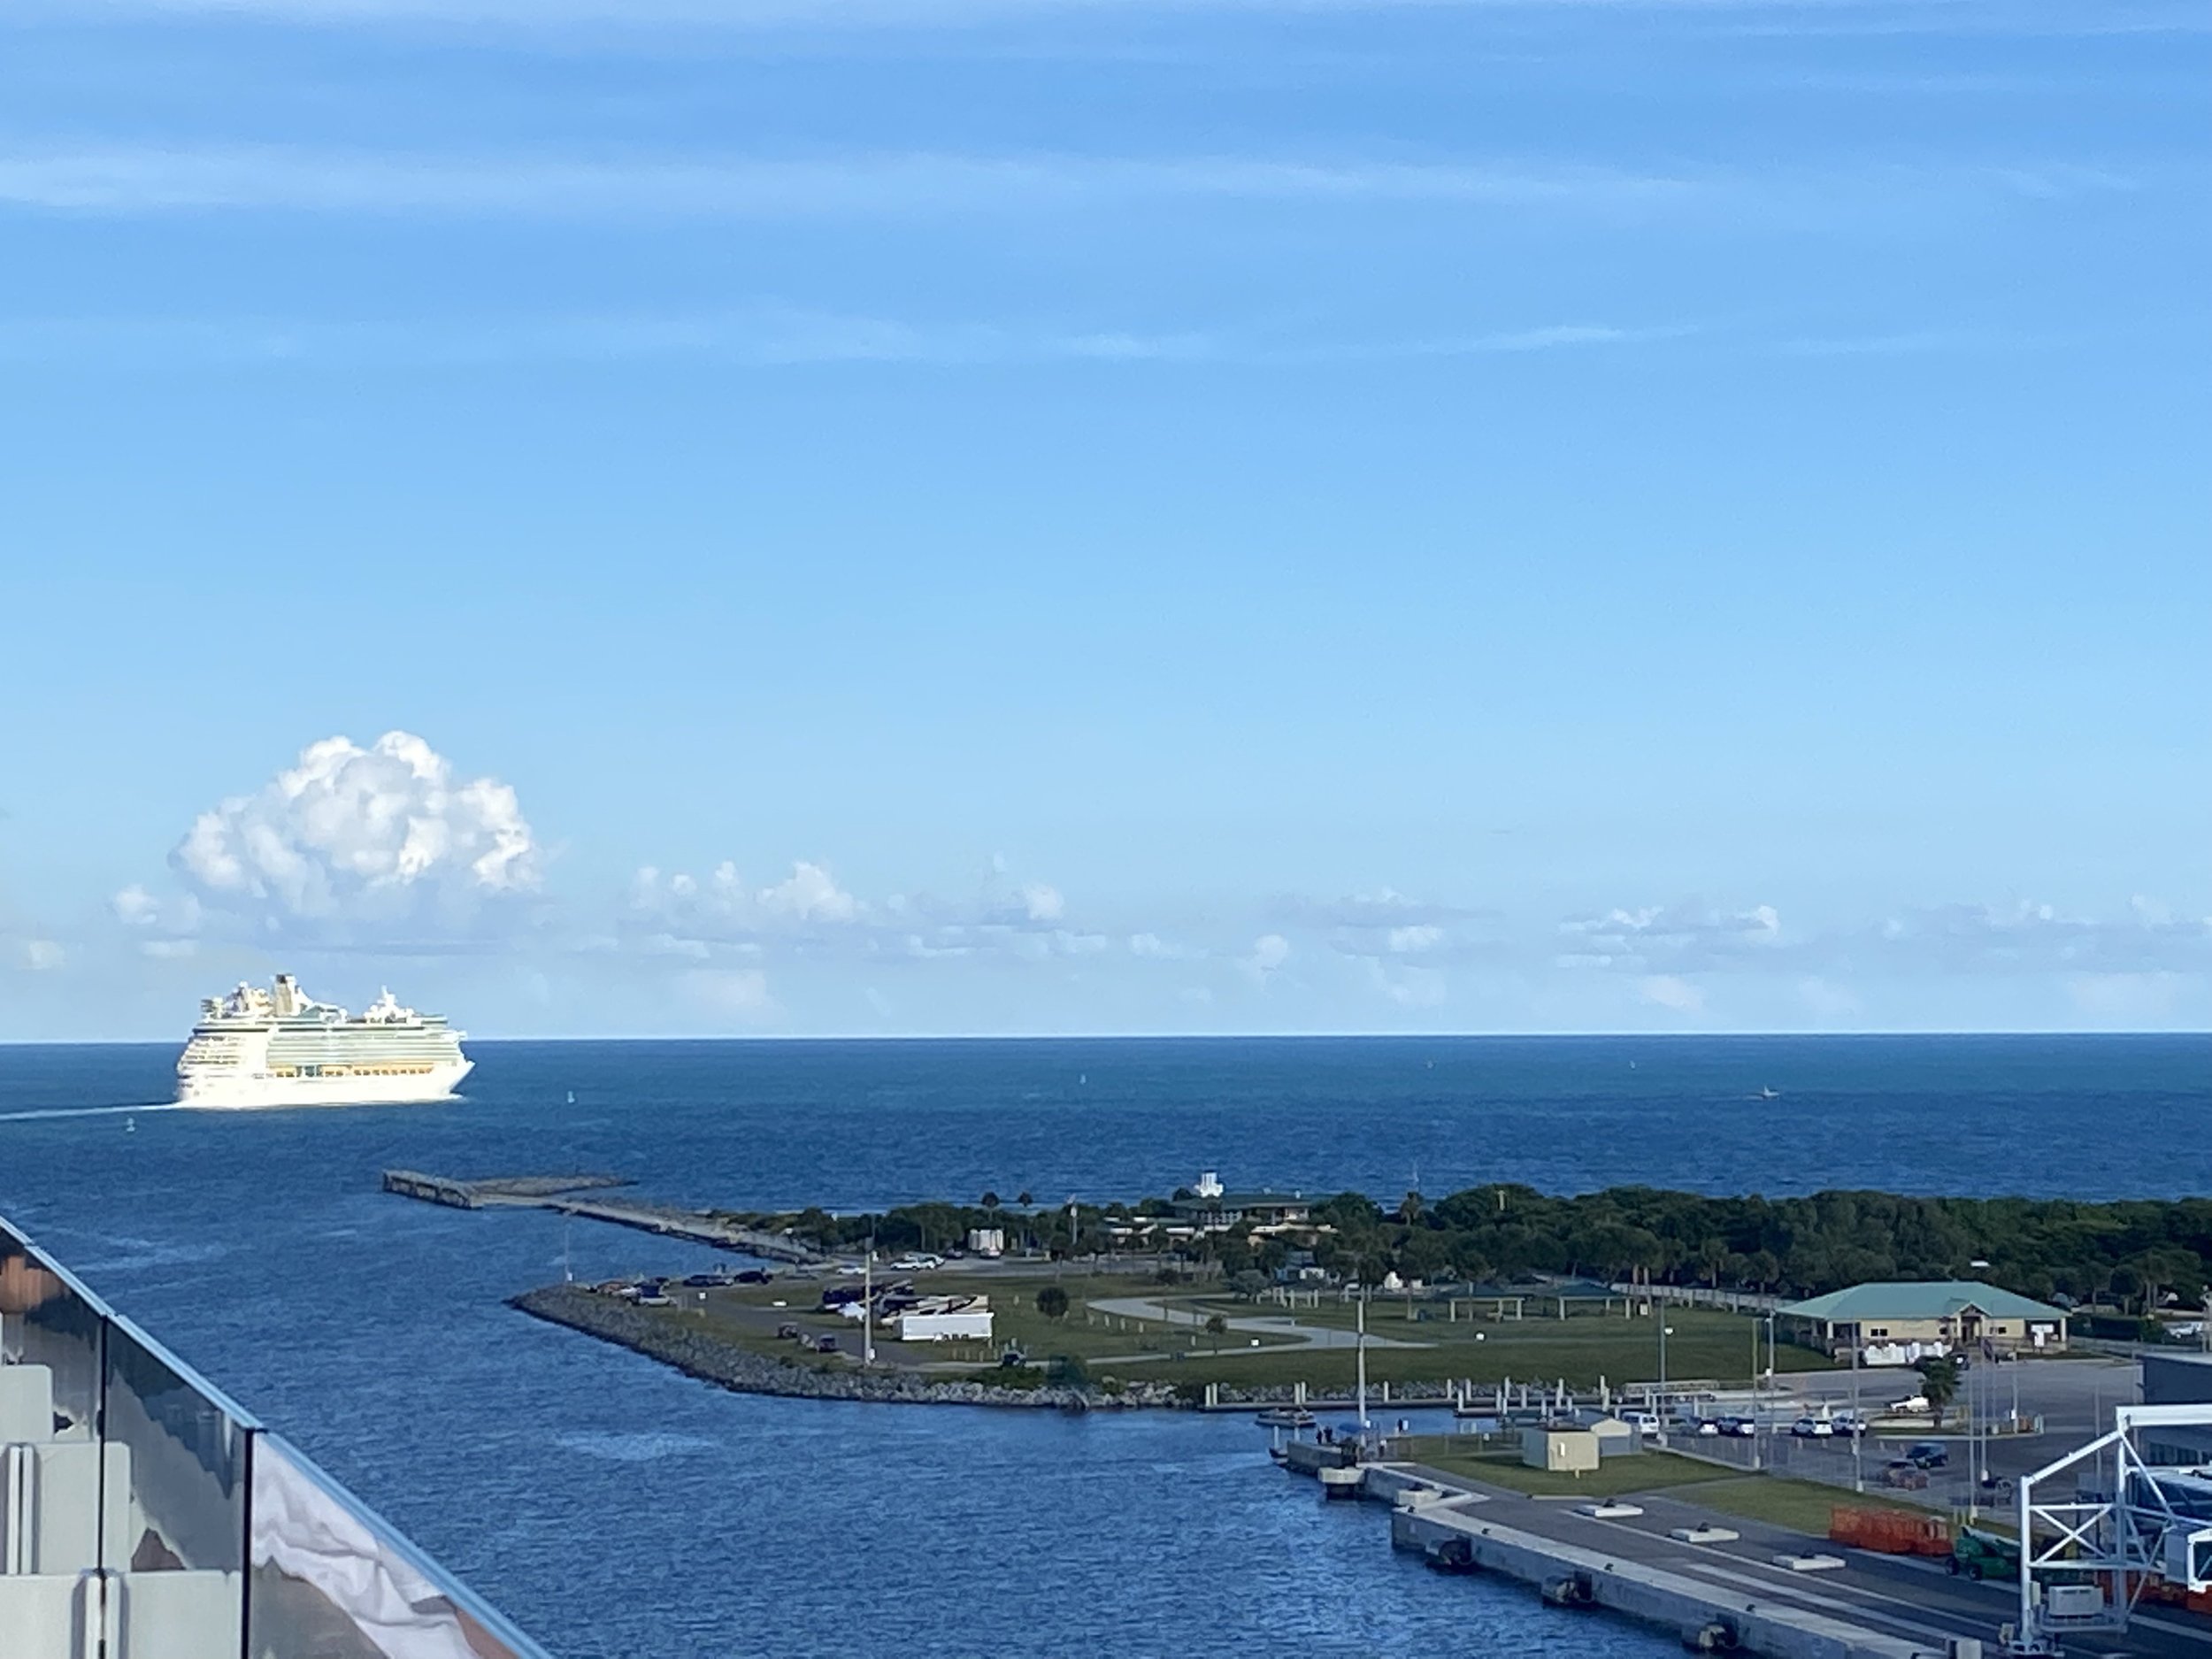  We departed Port Canaveral in late afternoon. For the first few hours, we sailed with Royal Caribbean before parting ways.   I love when people come outside of the area restaurants to watch the Disney Dream pass through the channel. It’s a sight to 